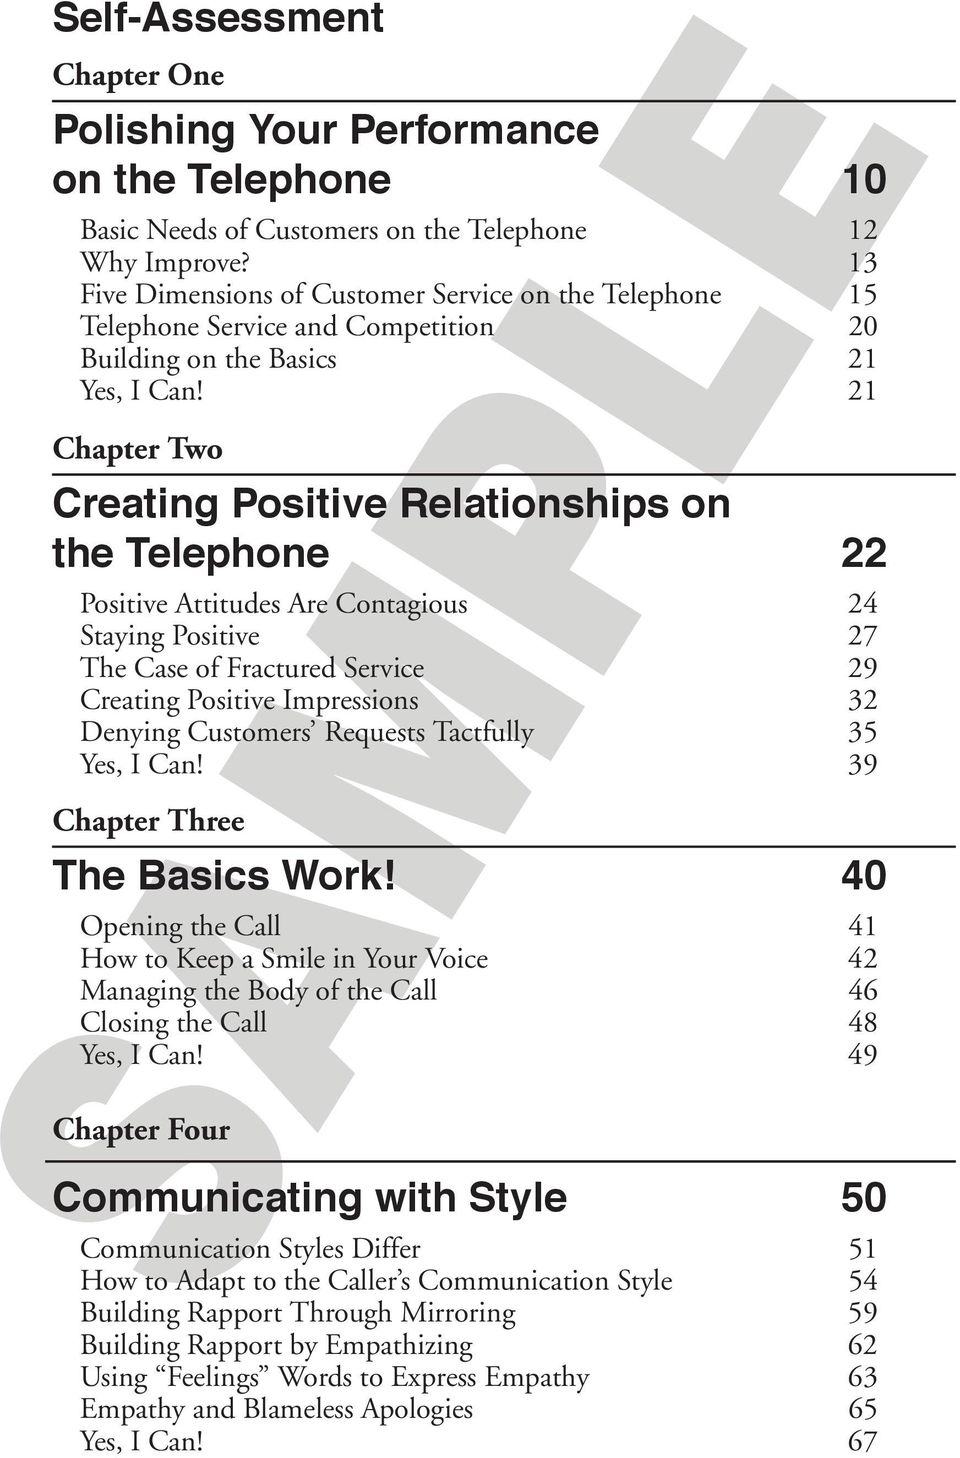 21 Chapter Two Creating Positive Relationships on the Telephone 22 Positive Attitudes Are Contagious 24 Staying Positive 27 The Case of Fractured Service 29 Creating Positive Impressions 32 Denying